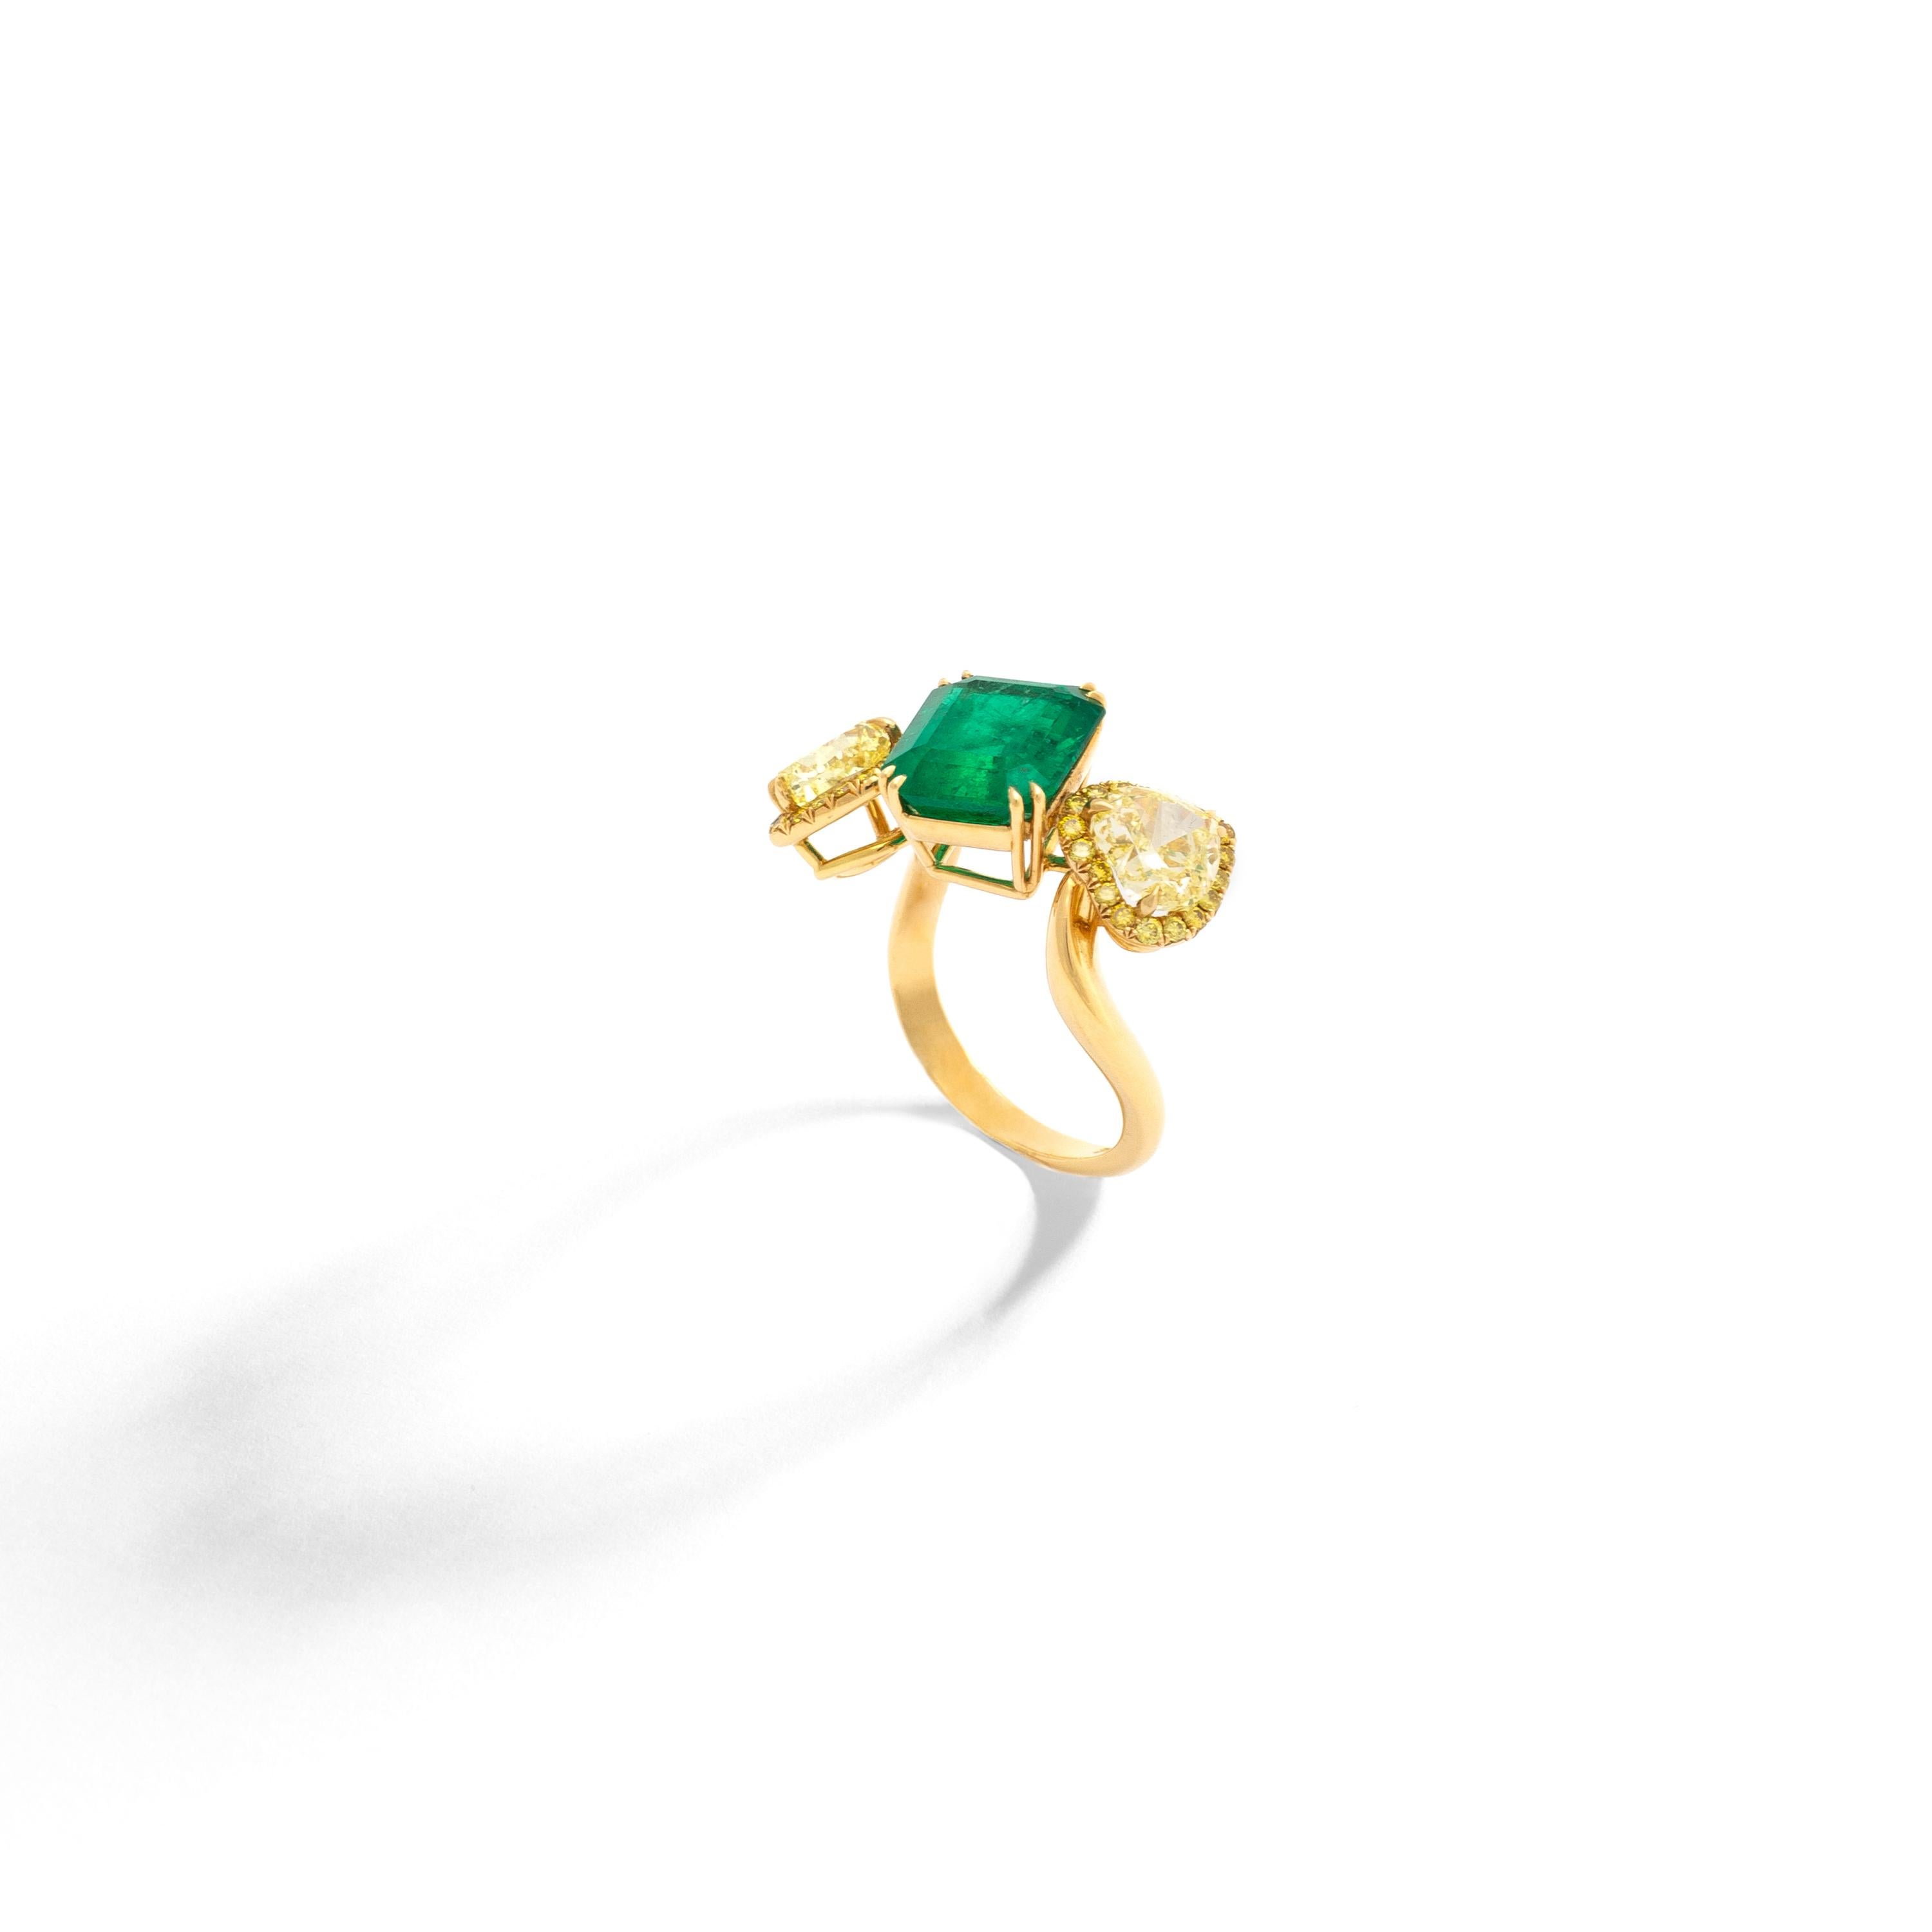 4.45 carats Emerald, heart shape Diamonds respectively 1.26 carats and 1.31 carats. 
The yellow gold 18k ring is set by 36 yellow diamonds 0.34 carat total.